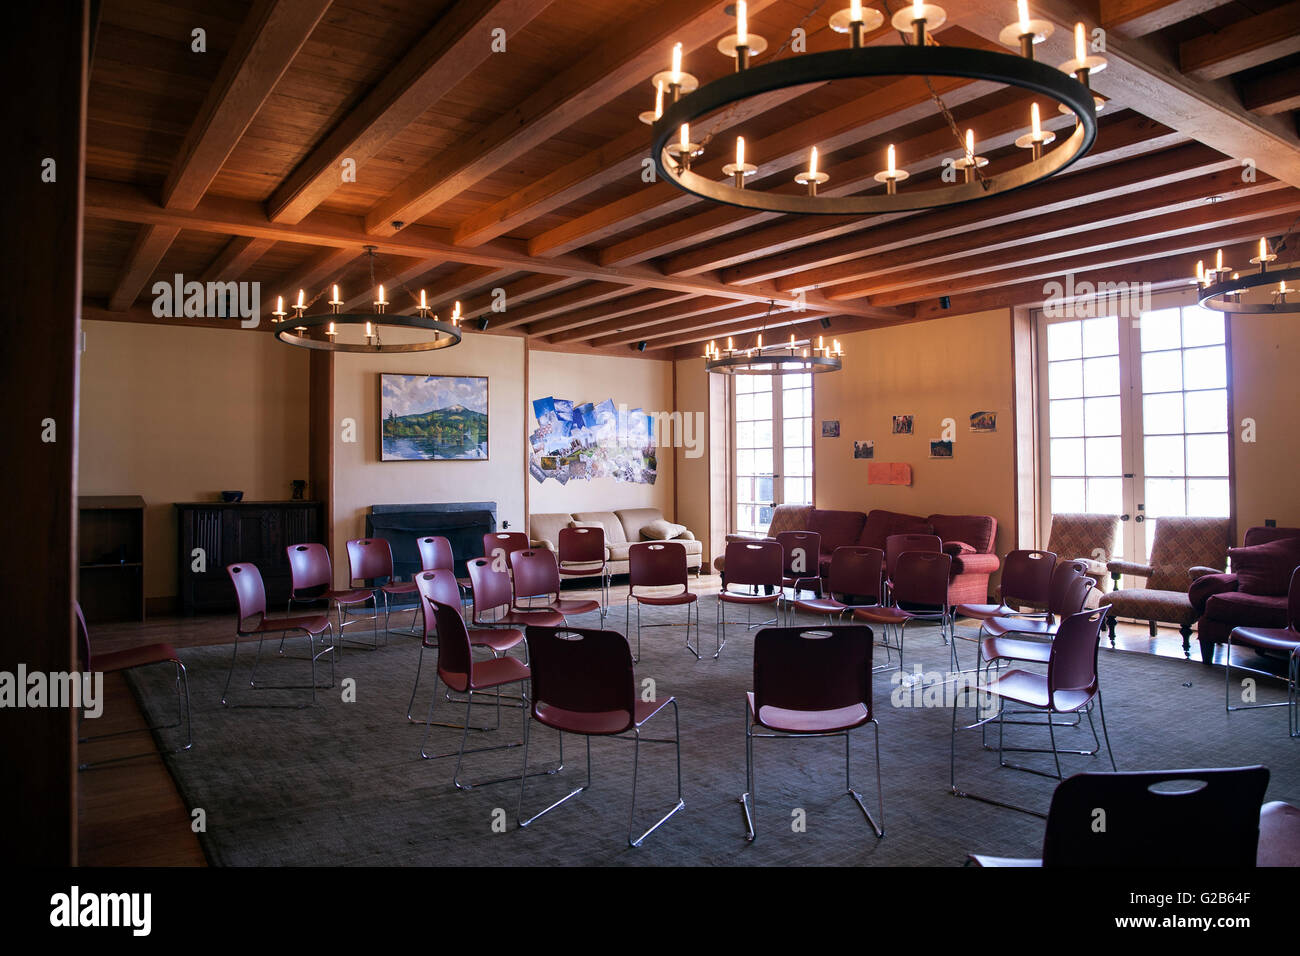 Meeting room in the Dining Hall building at Groton School, an elite prep school in Groton Massachusetts. Stock Photo